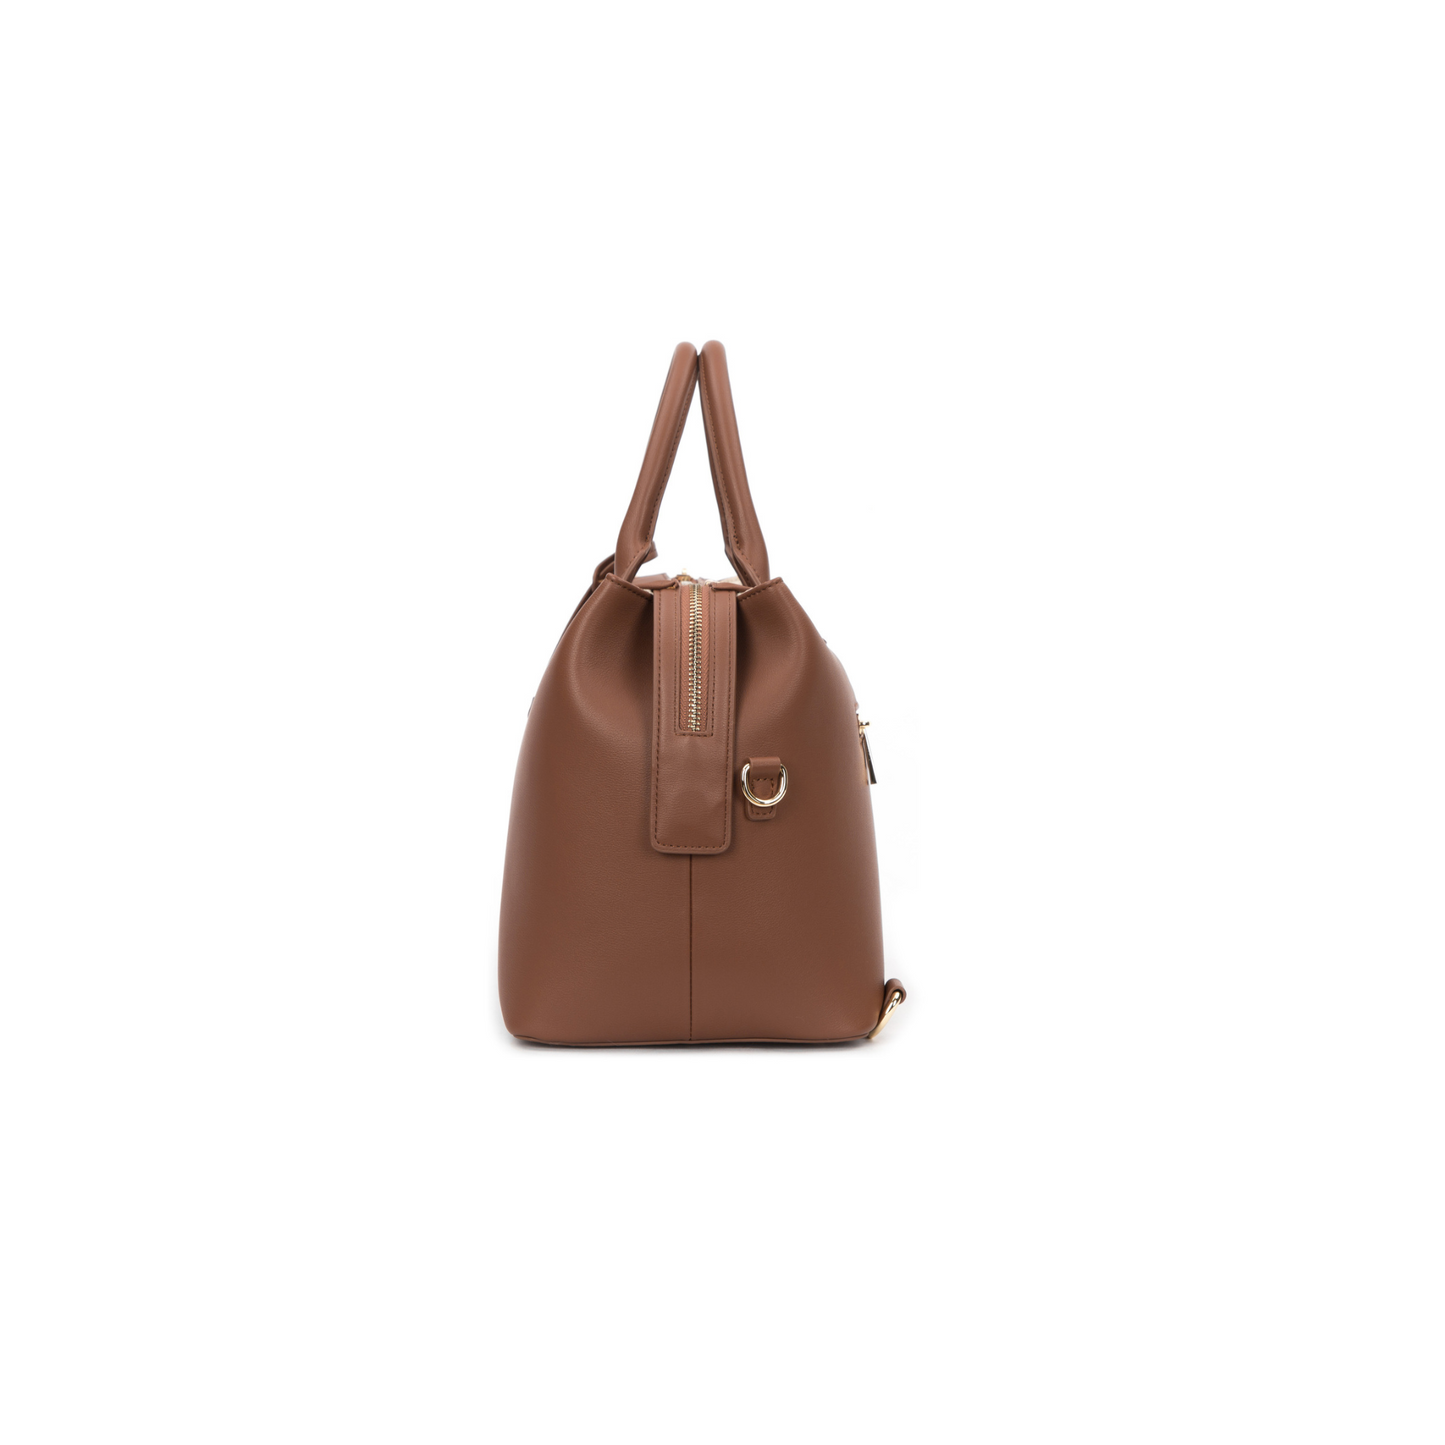 side view of tote bag in brown - zuri tote from yuuma